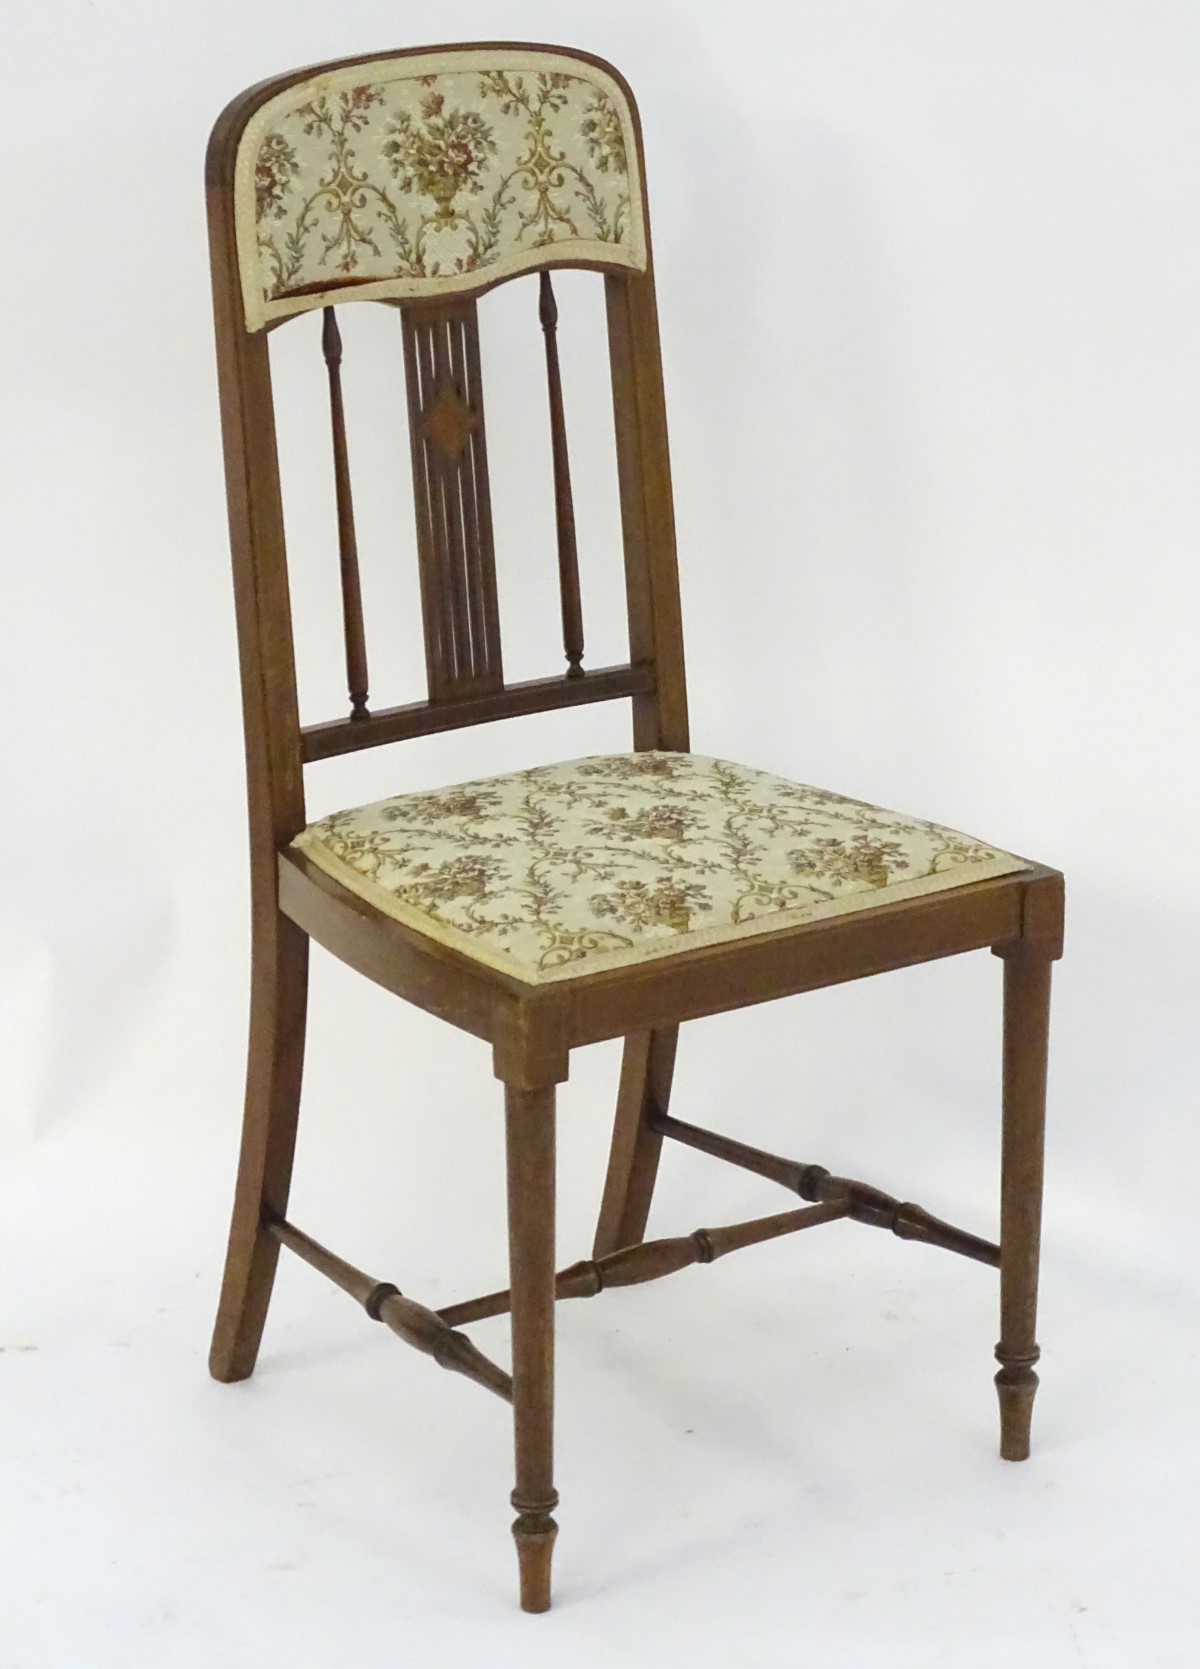 An early 20thC mahogany bedroom chair with a slatted backrest and inlaid decoration,